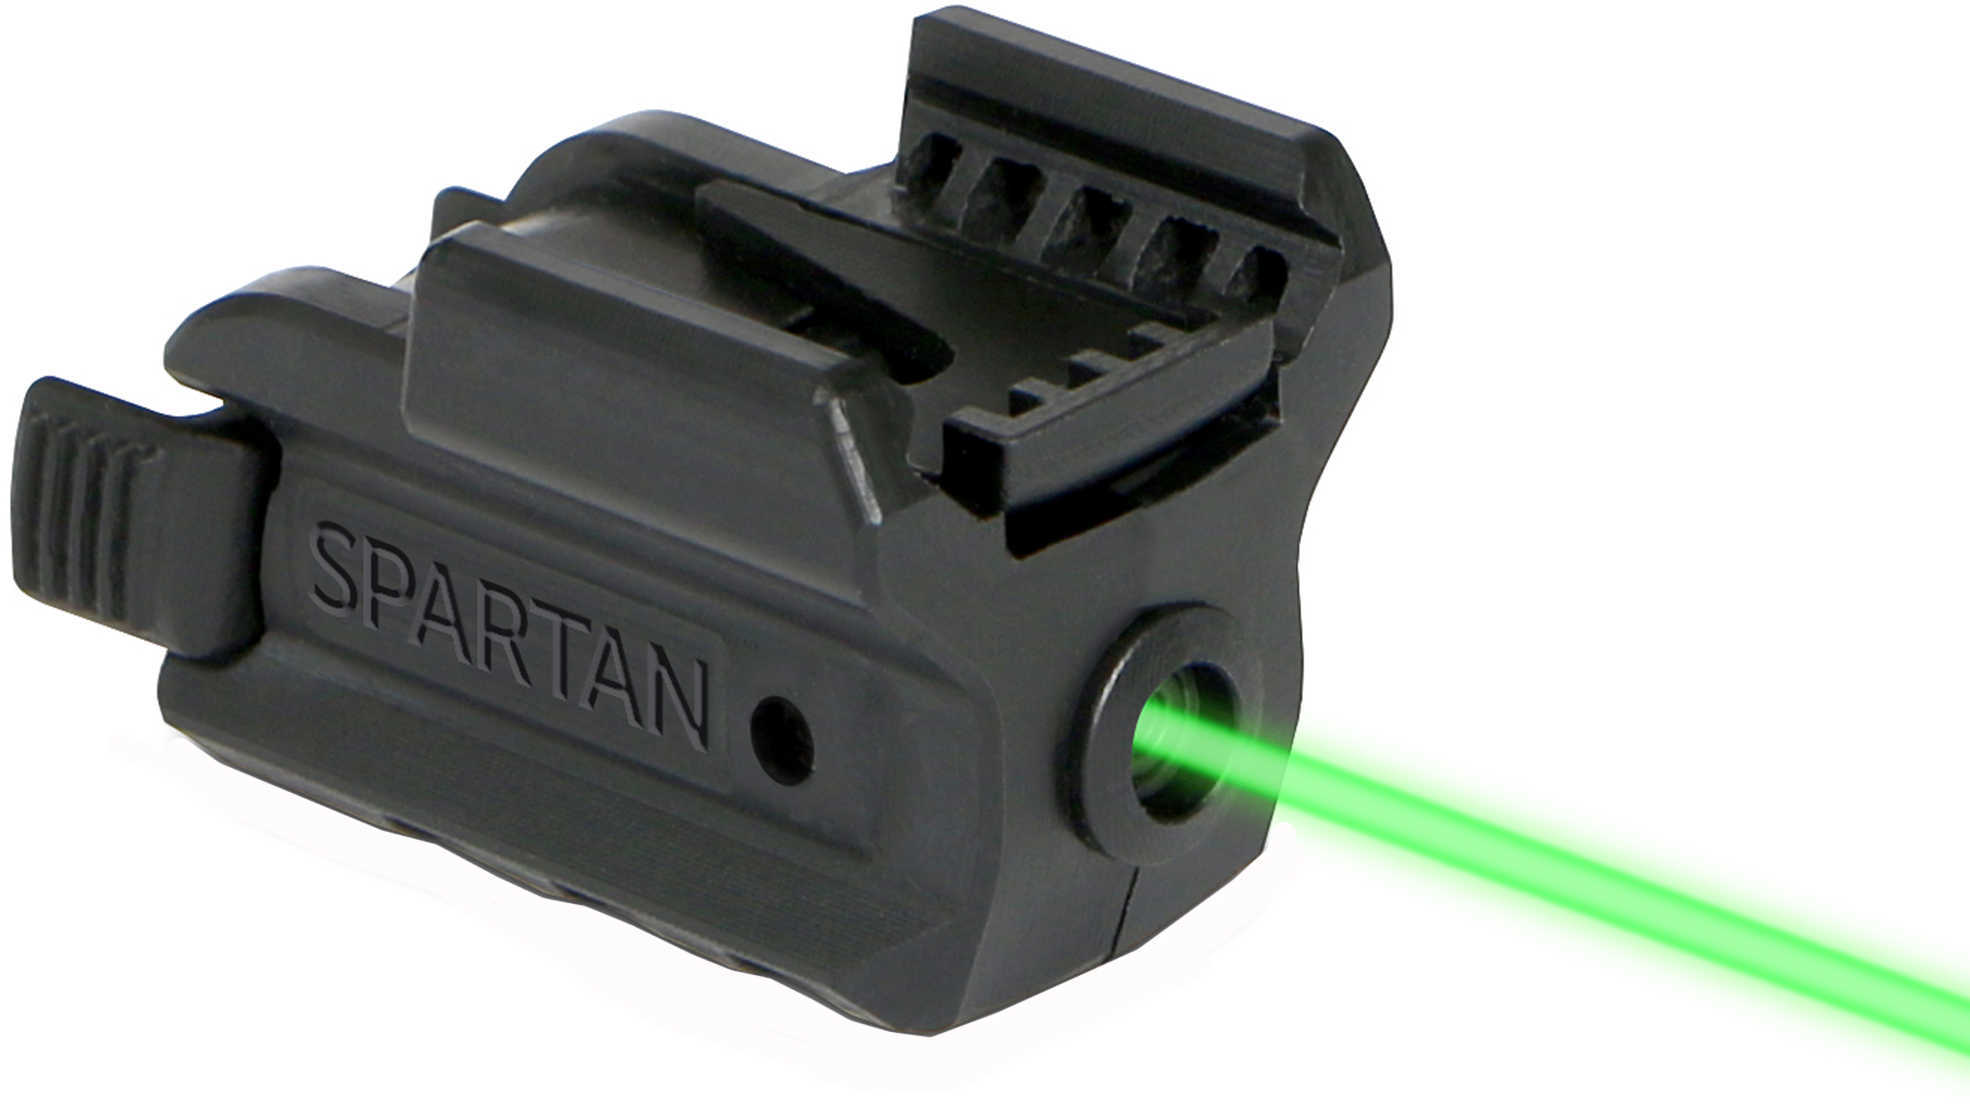 LaserMax Spartan Green Fits Picatinny Black Finish Adjustable with Battery SPS-G